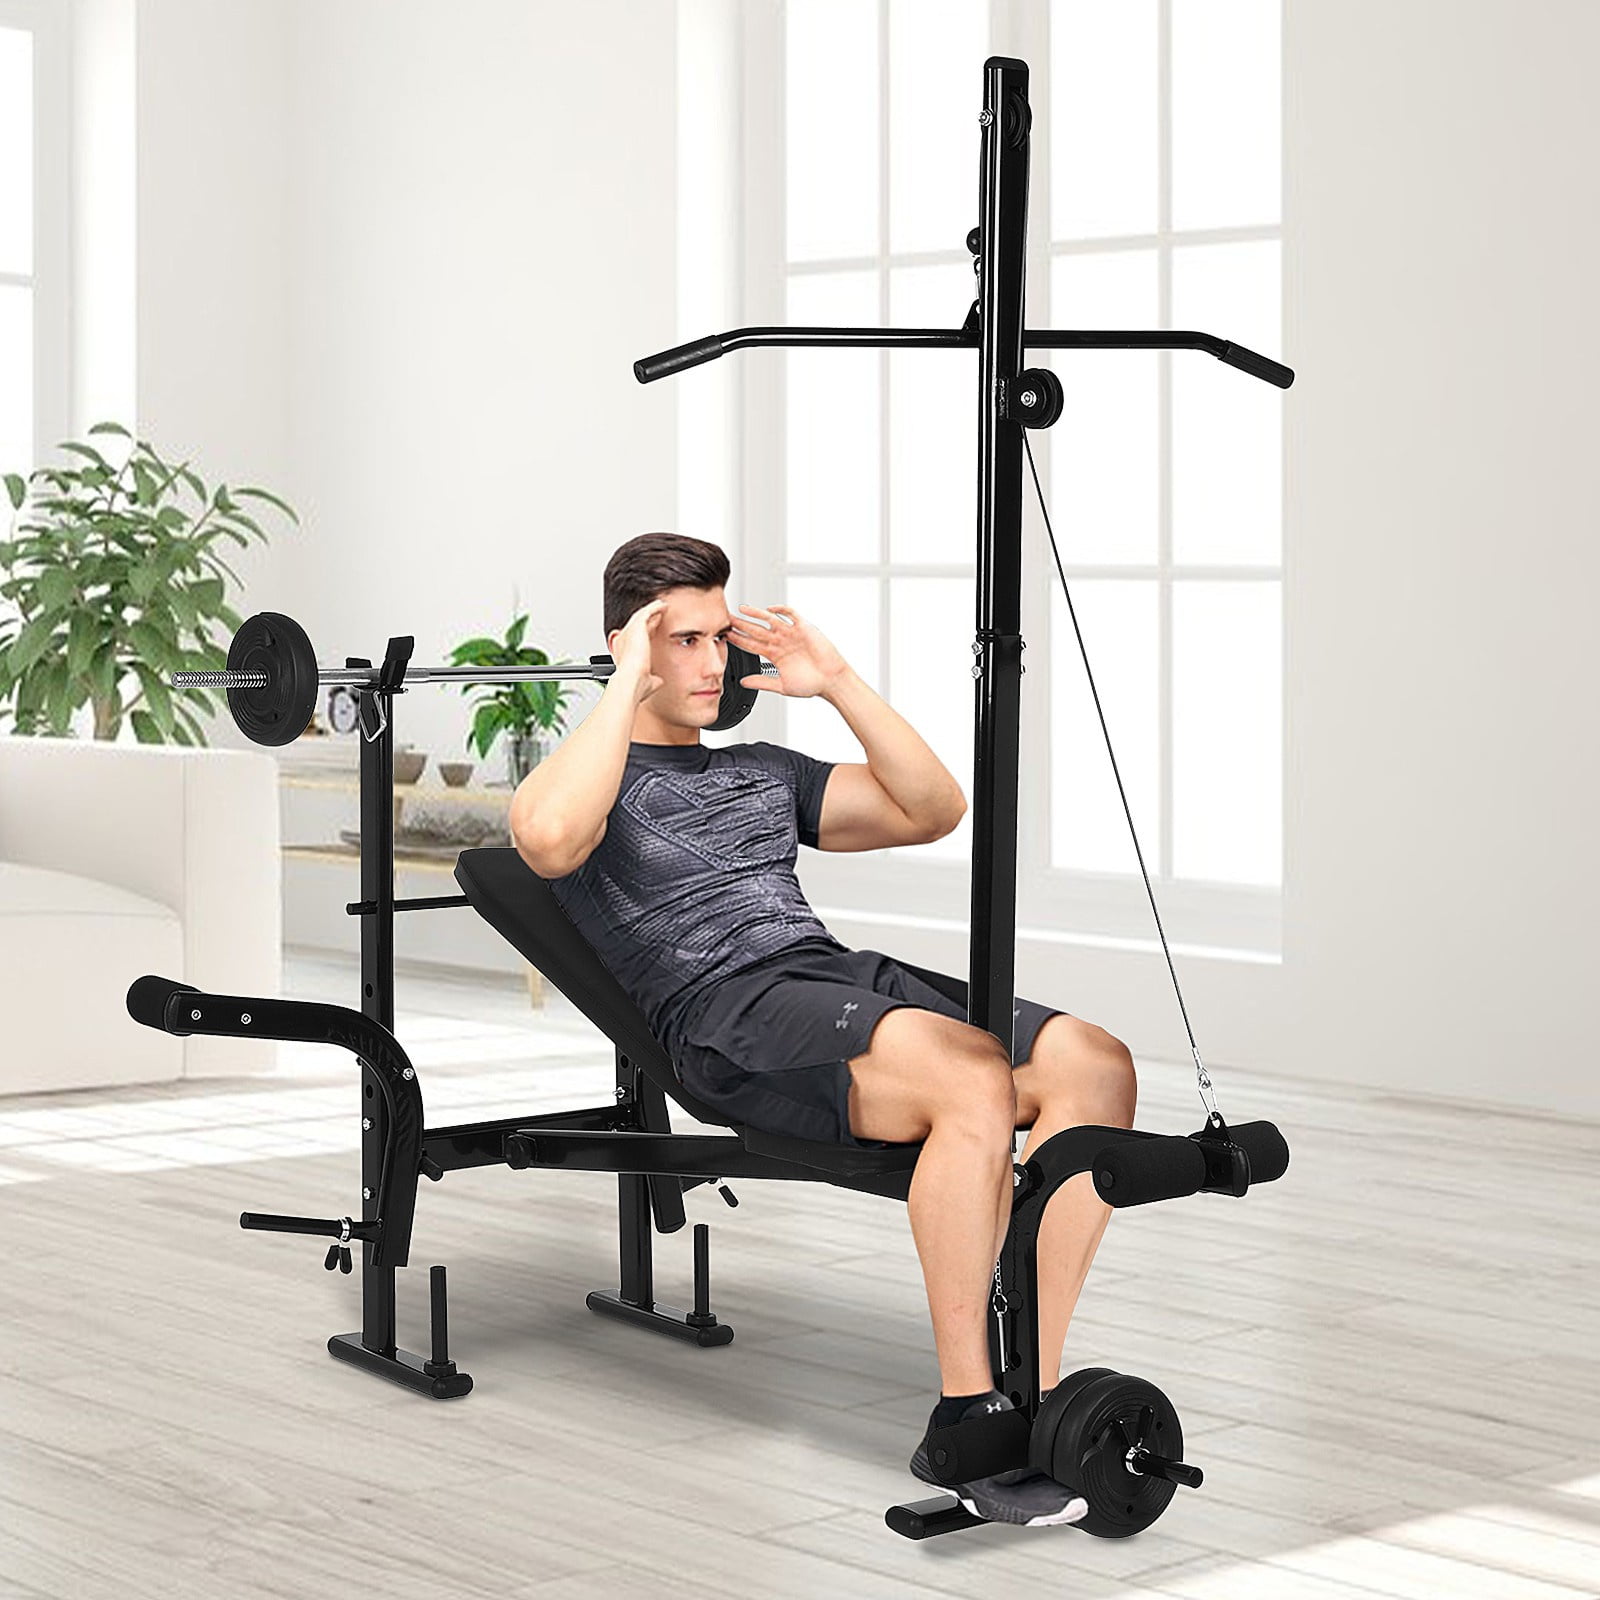 Details about   Weight Bench Set With Weight Home Fitness Bench Lifting Barbell Rack Exercise US 